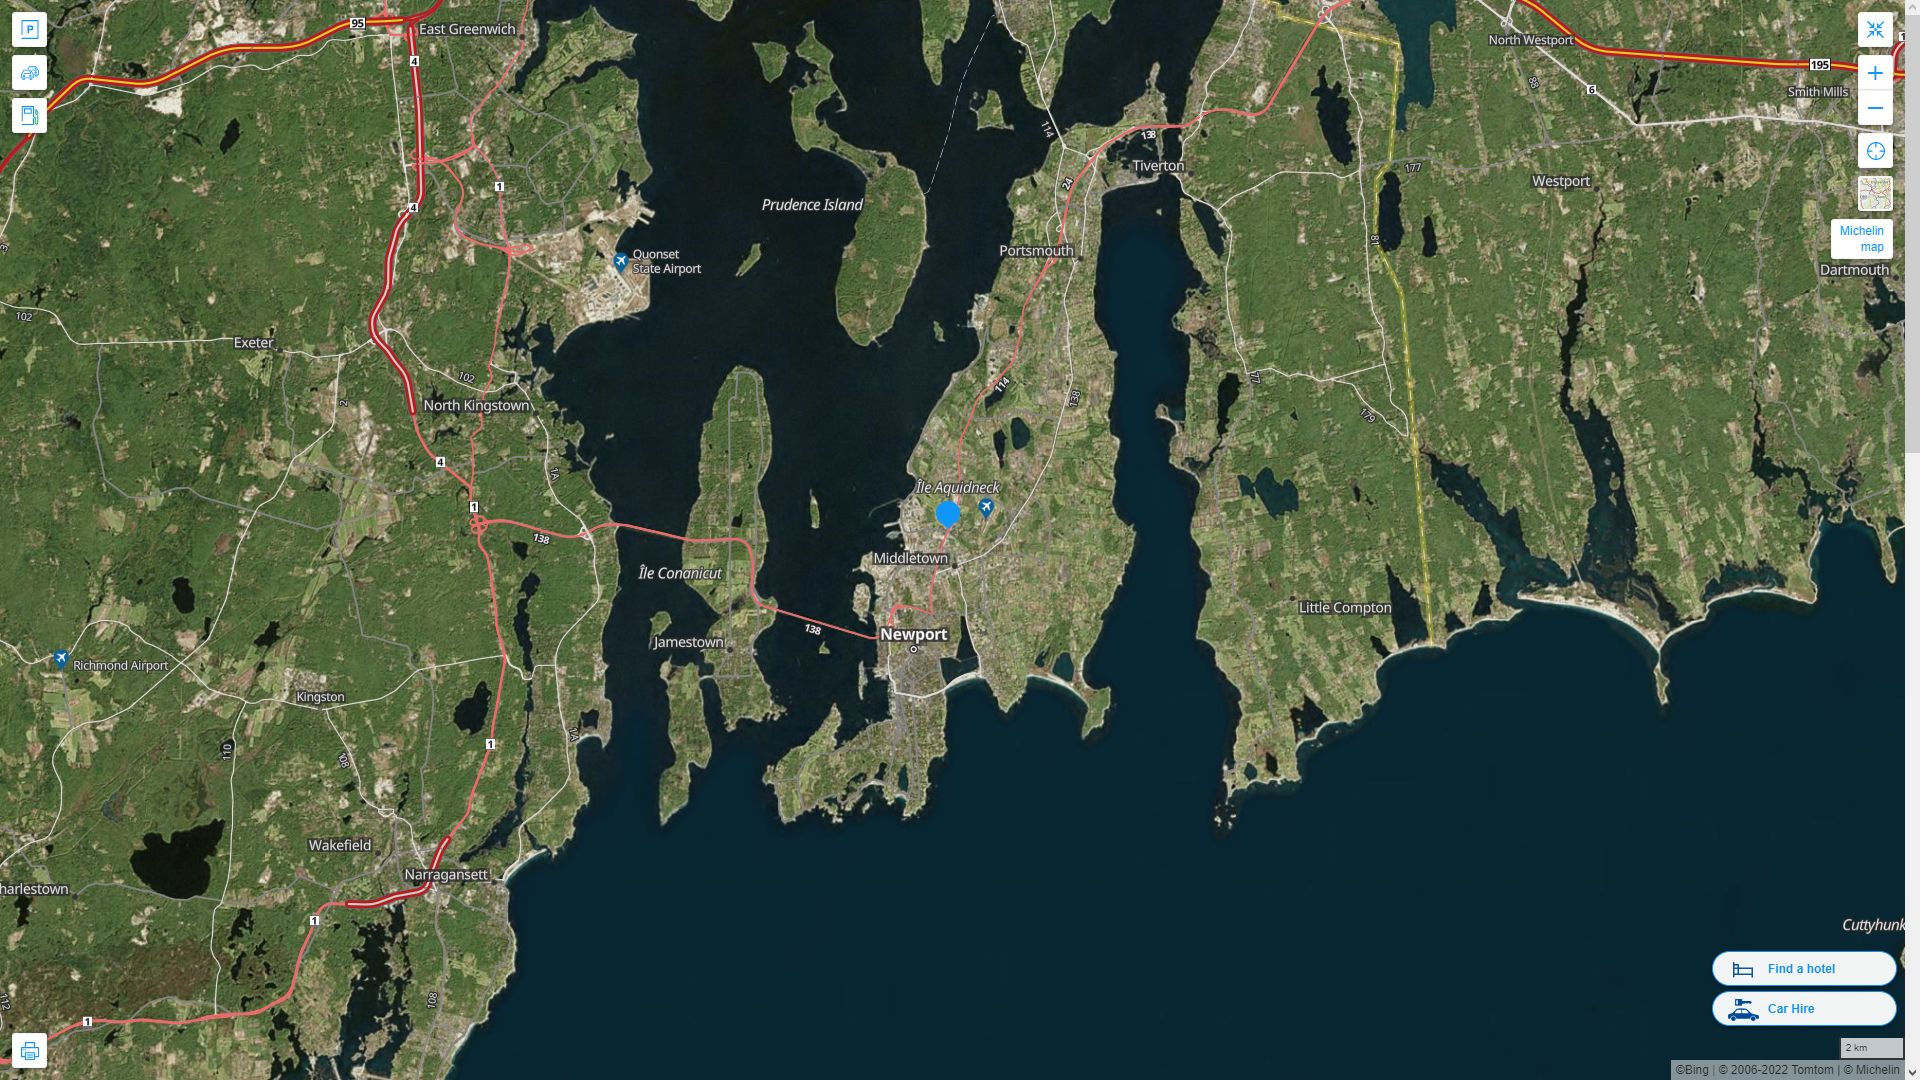 Newport East Rhode Island Highway and Road Map with Satellite View